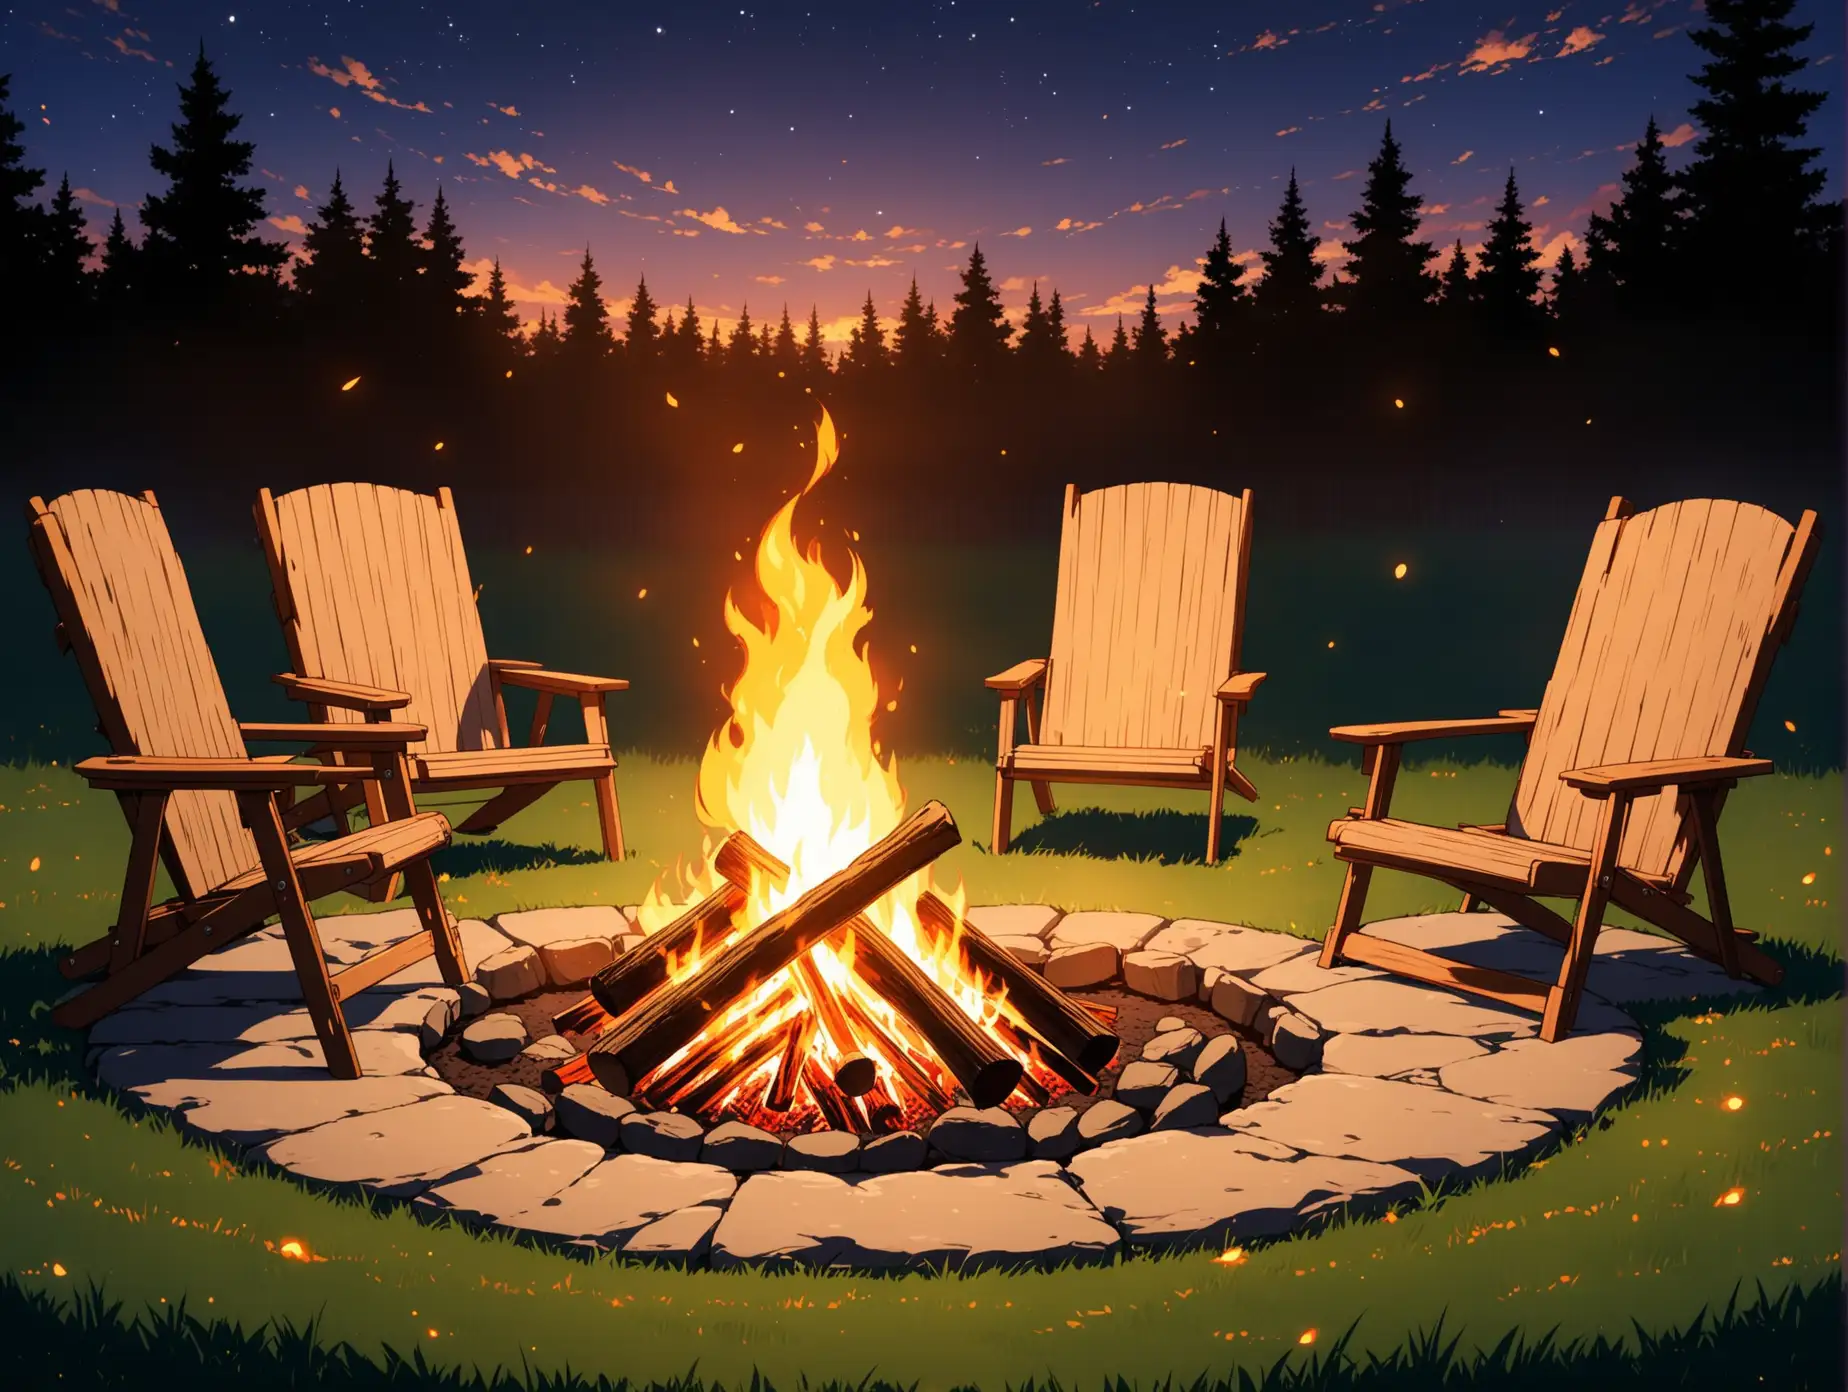 Anime Characters Gathered around Campfire in Yard Chairs